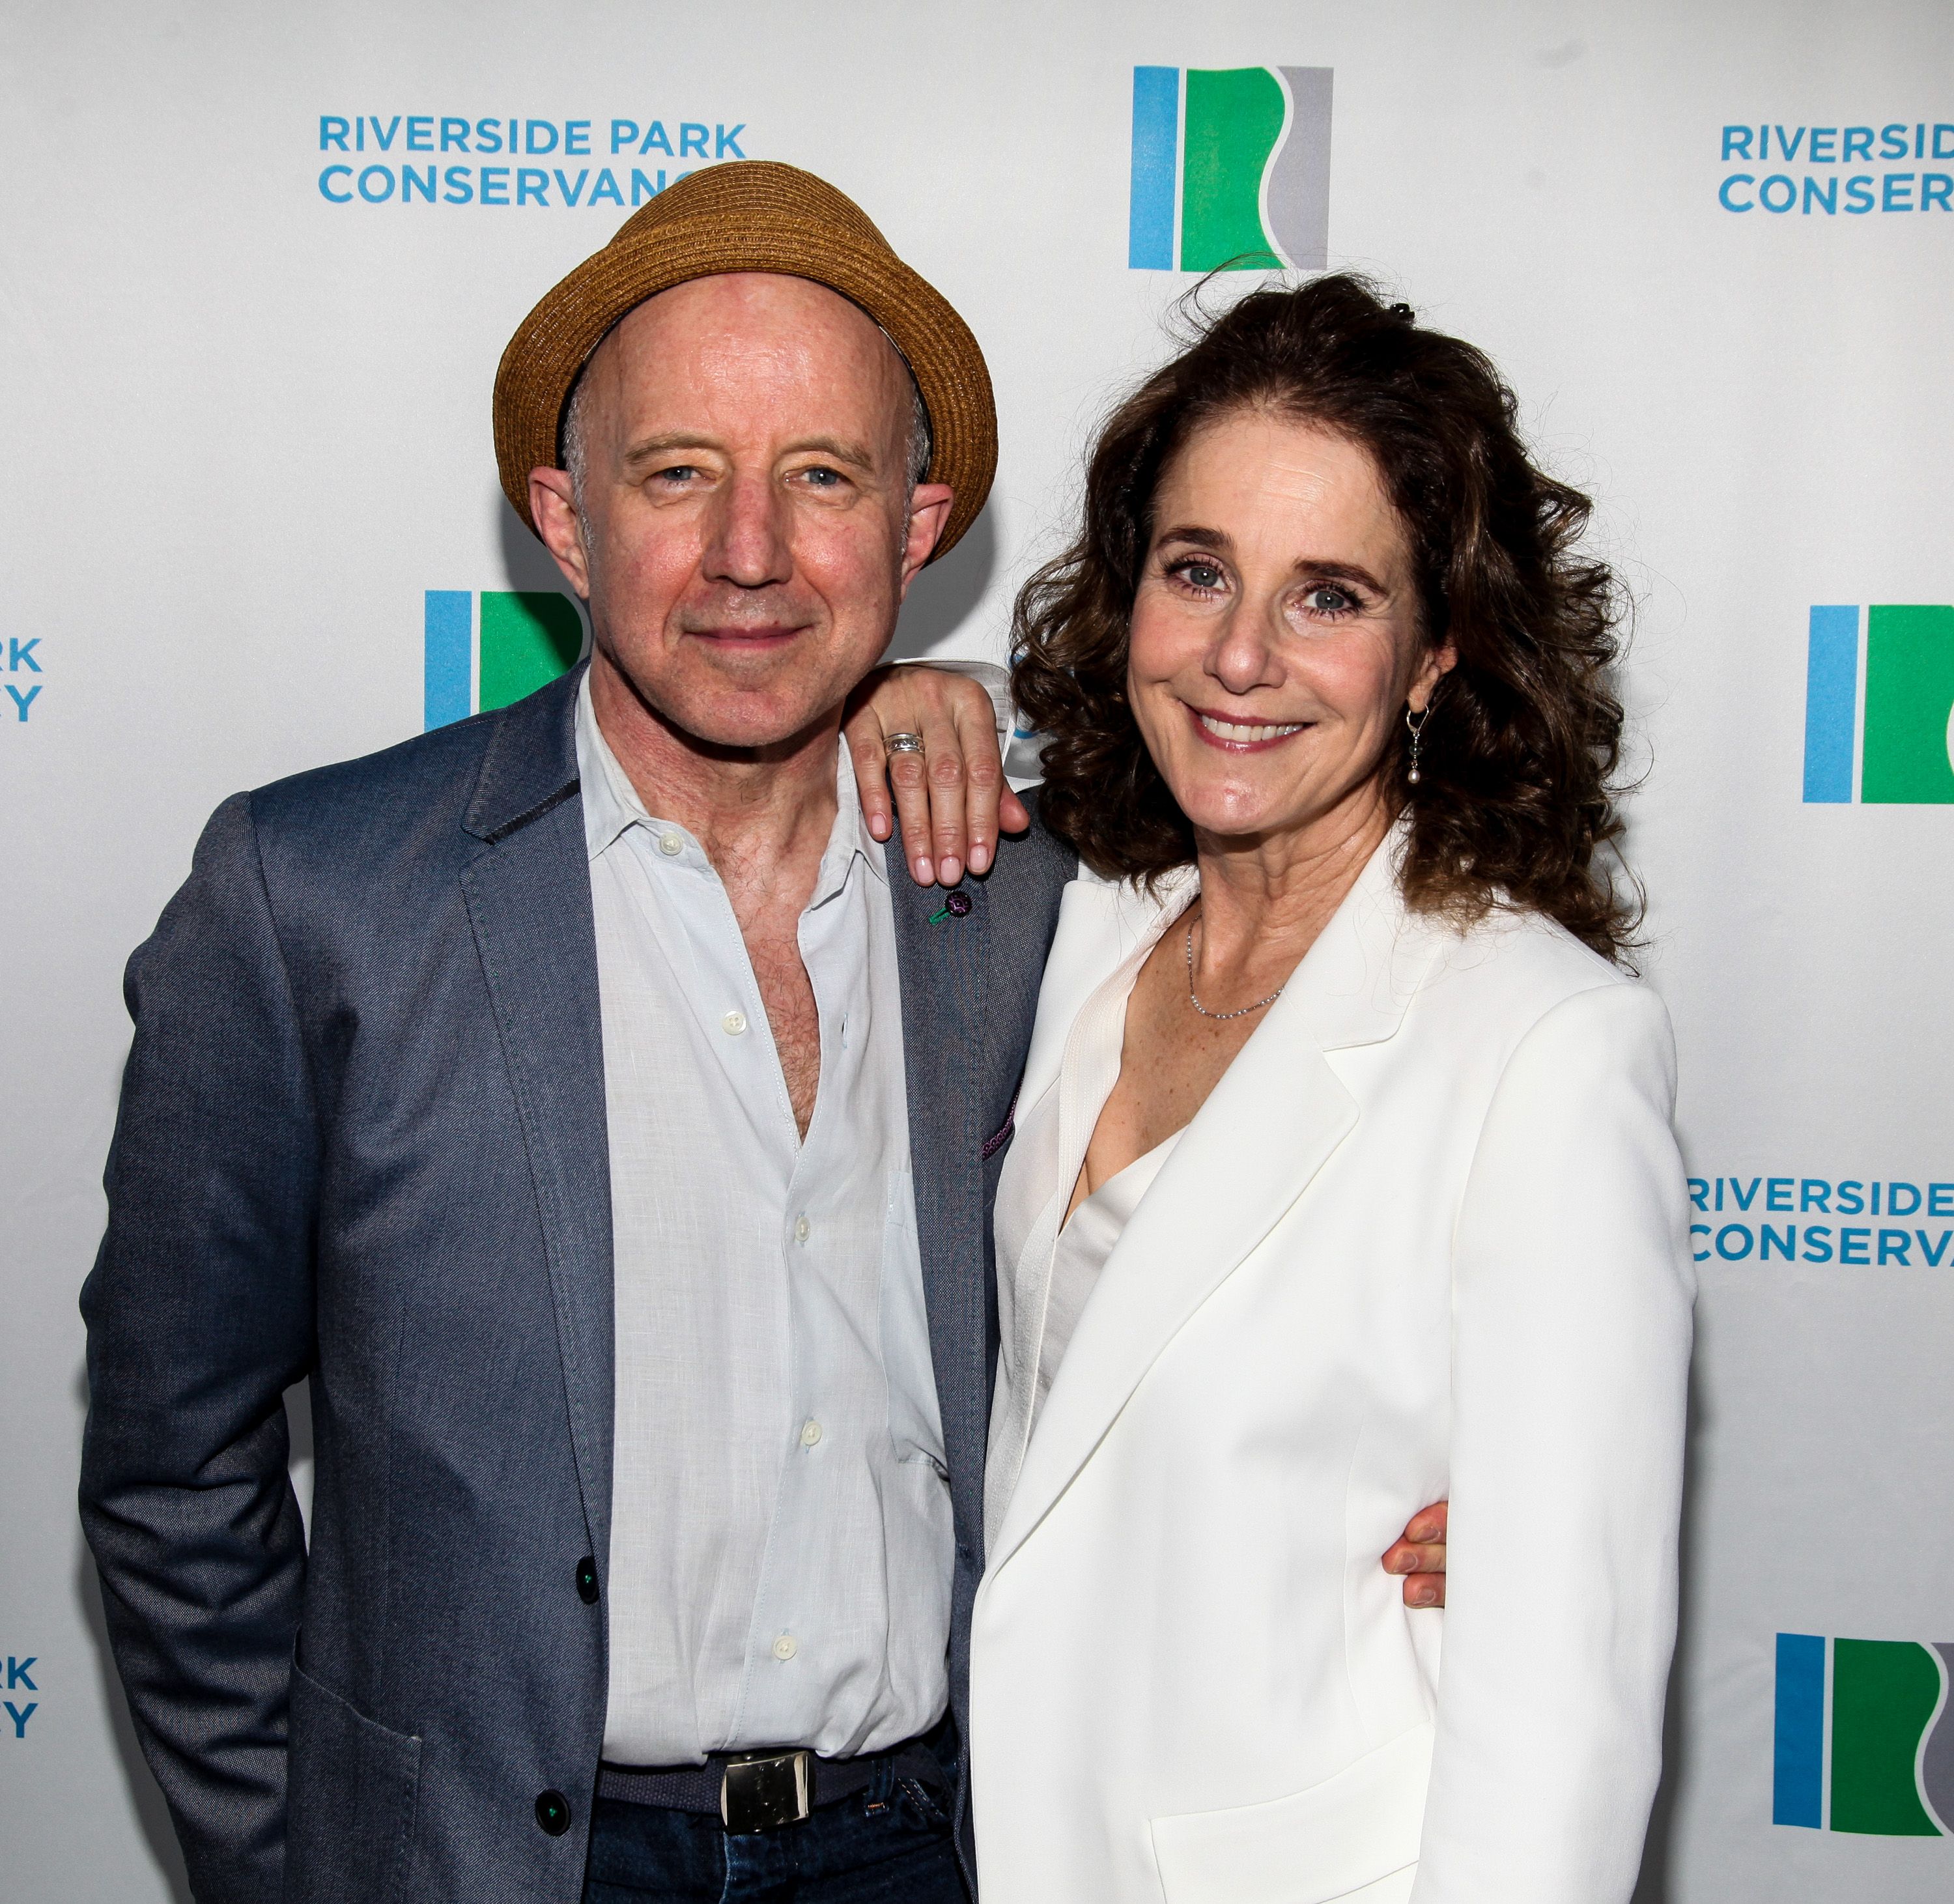 Arliss Howard and Debra Winger at Riverside Park Conservancy's Annual Spring Gala on June 6, 2016 in New York City | Photo: Getty Images